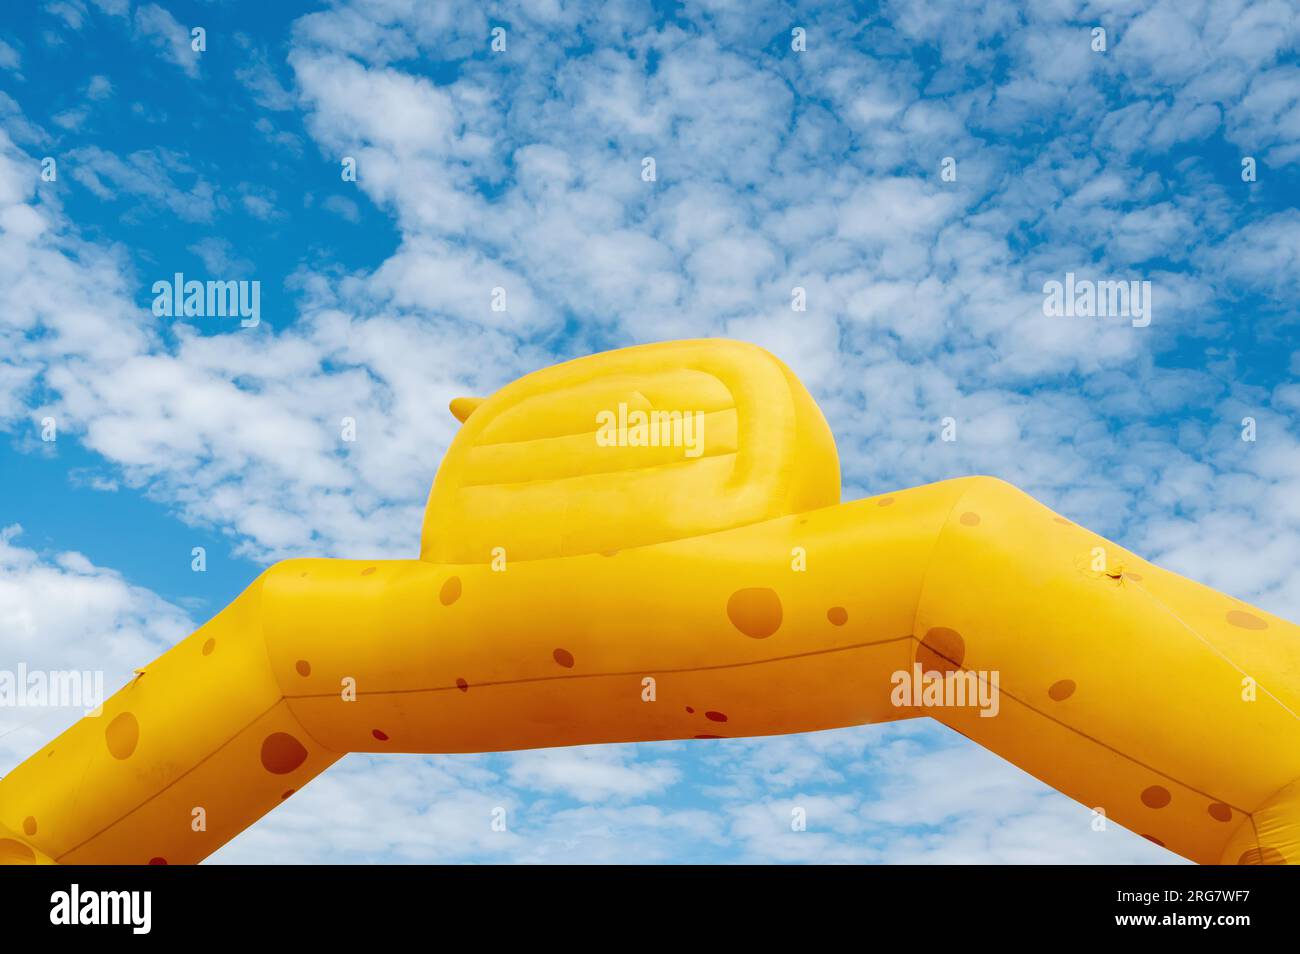 Yellow inflatable advertising banner with no lettering against the sky. Stock Photo